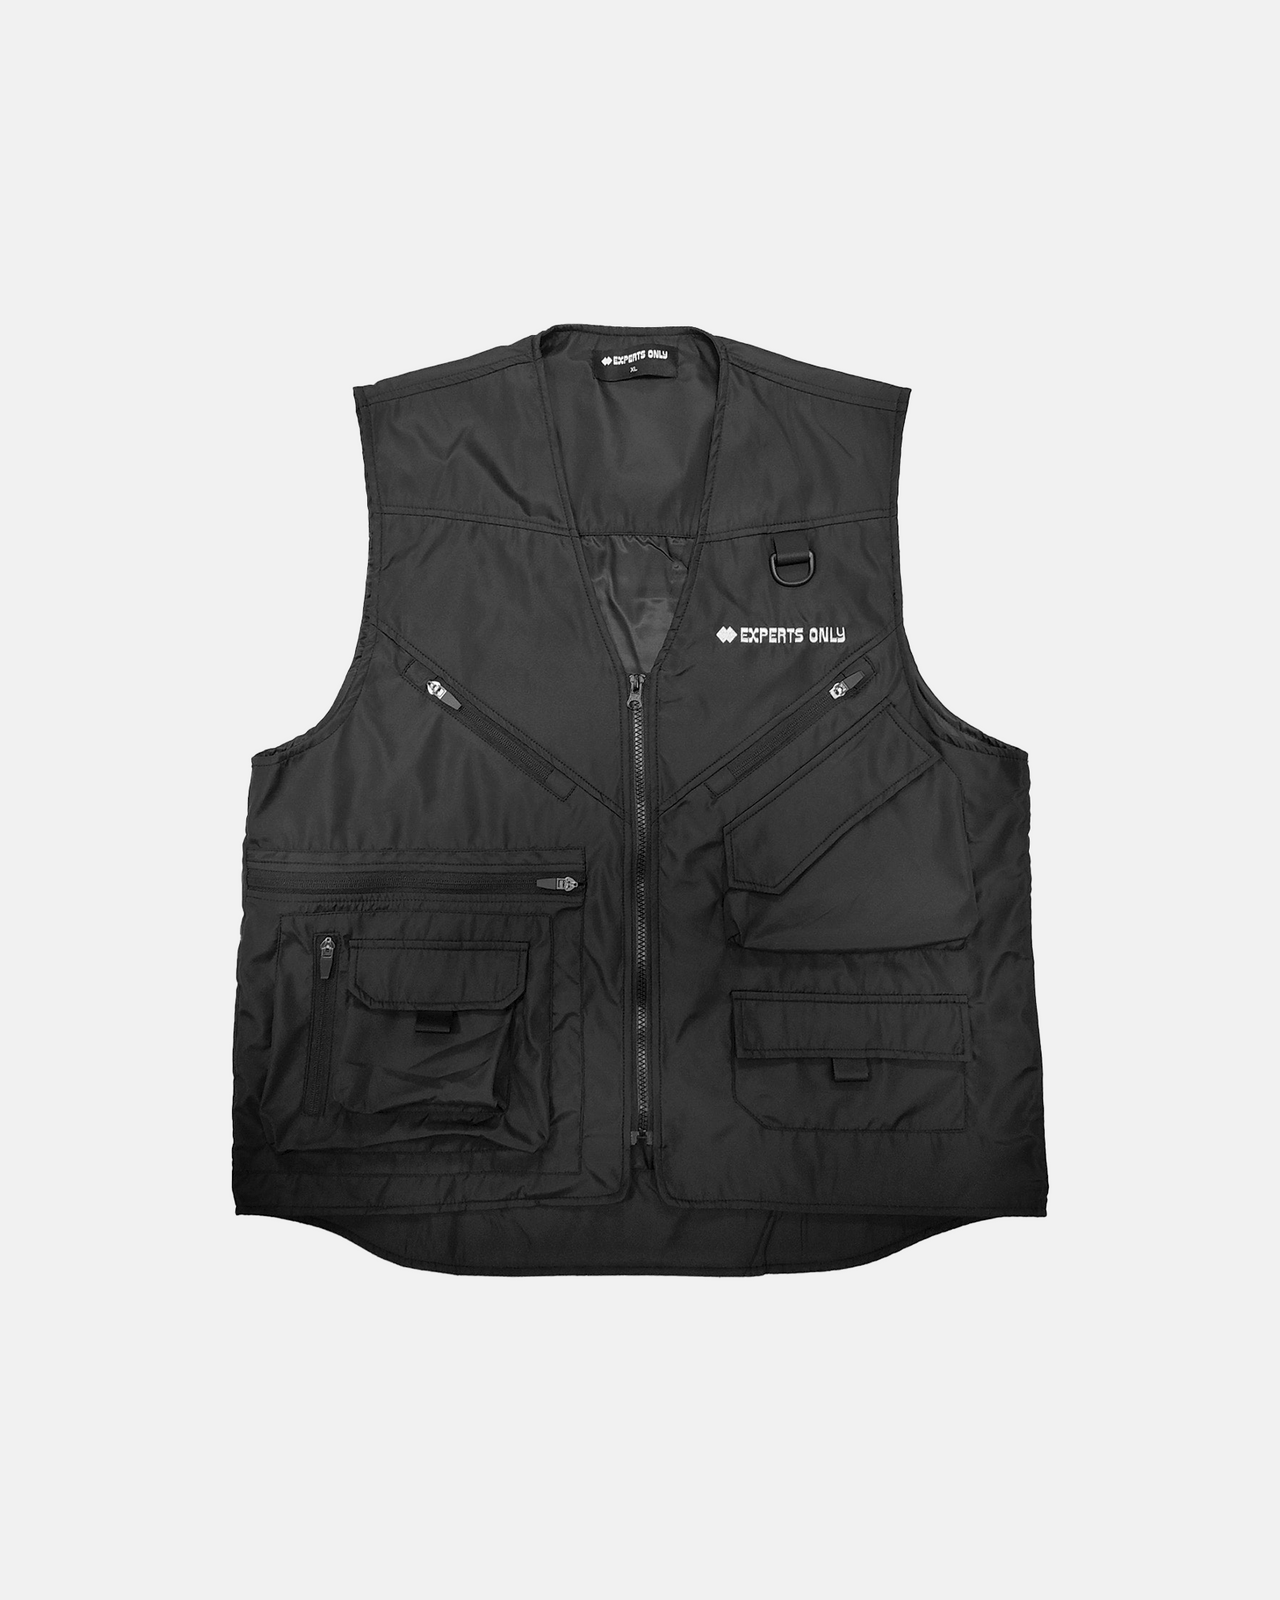 Experts Only Vest